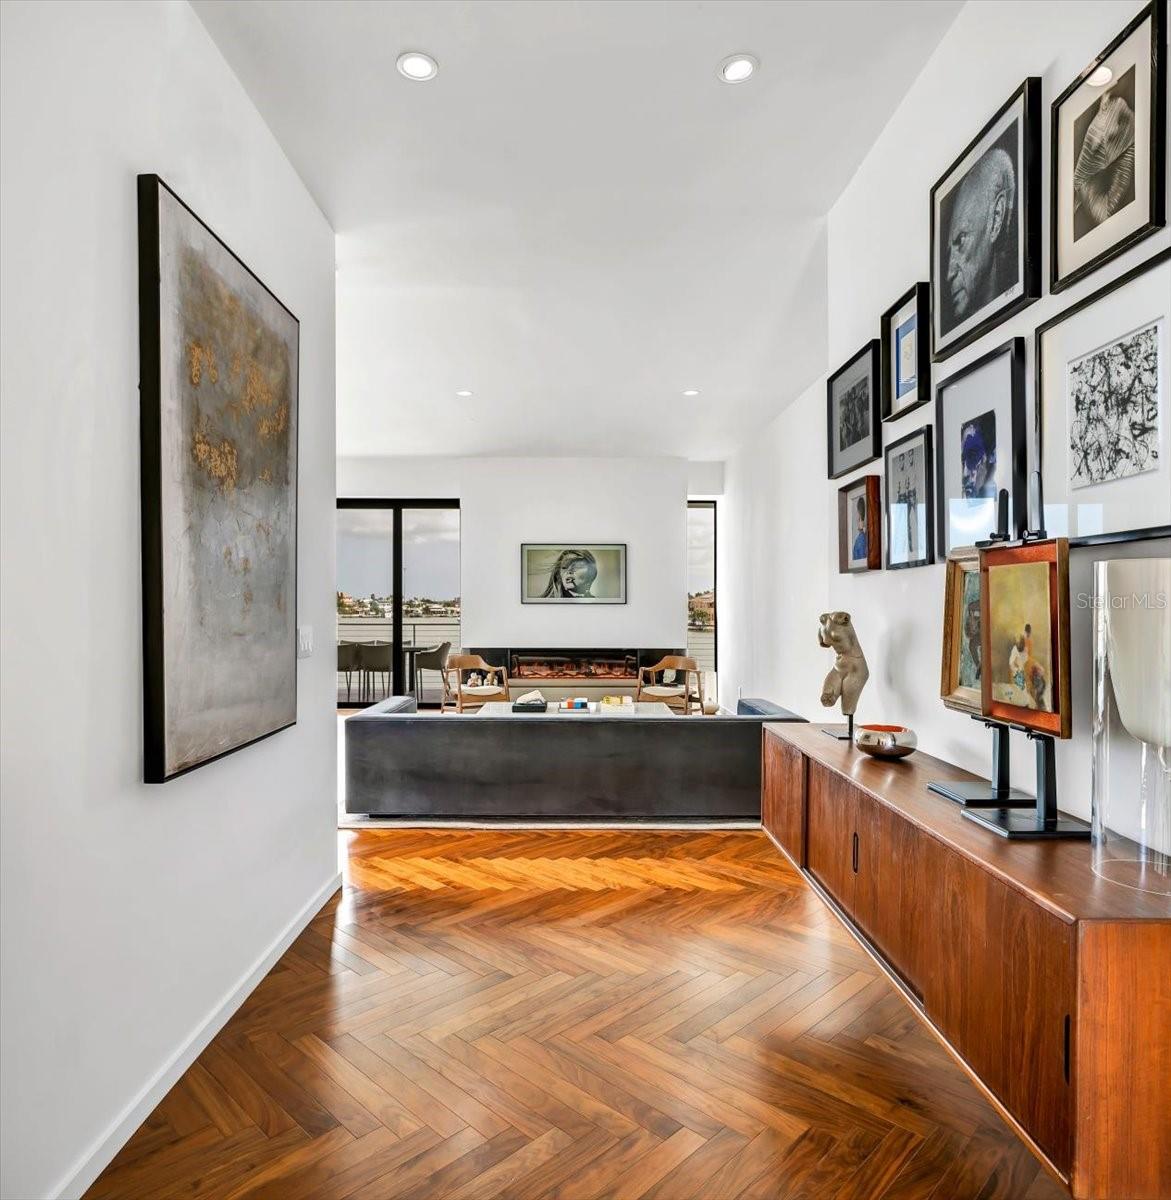 Note the meticulously laid herringbone-pattern wood flooring and perfectly matching credenza of this transitional area, calling you, welcoming you, to a home of soothing character and substance